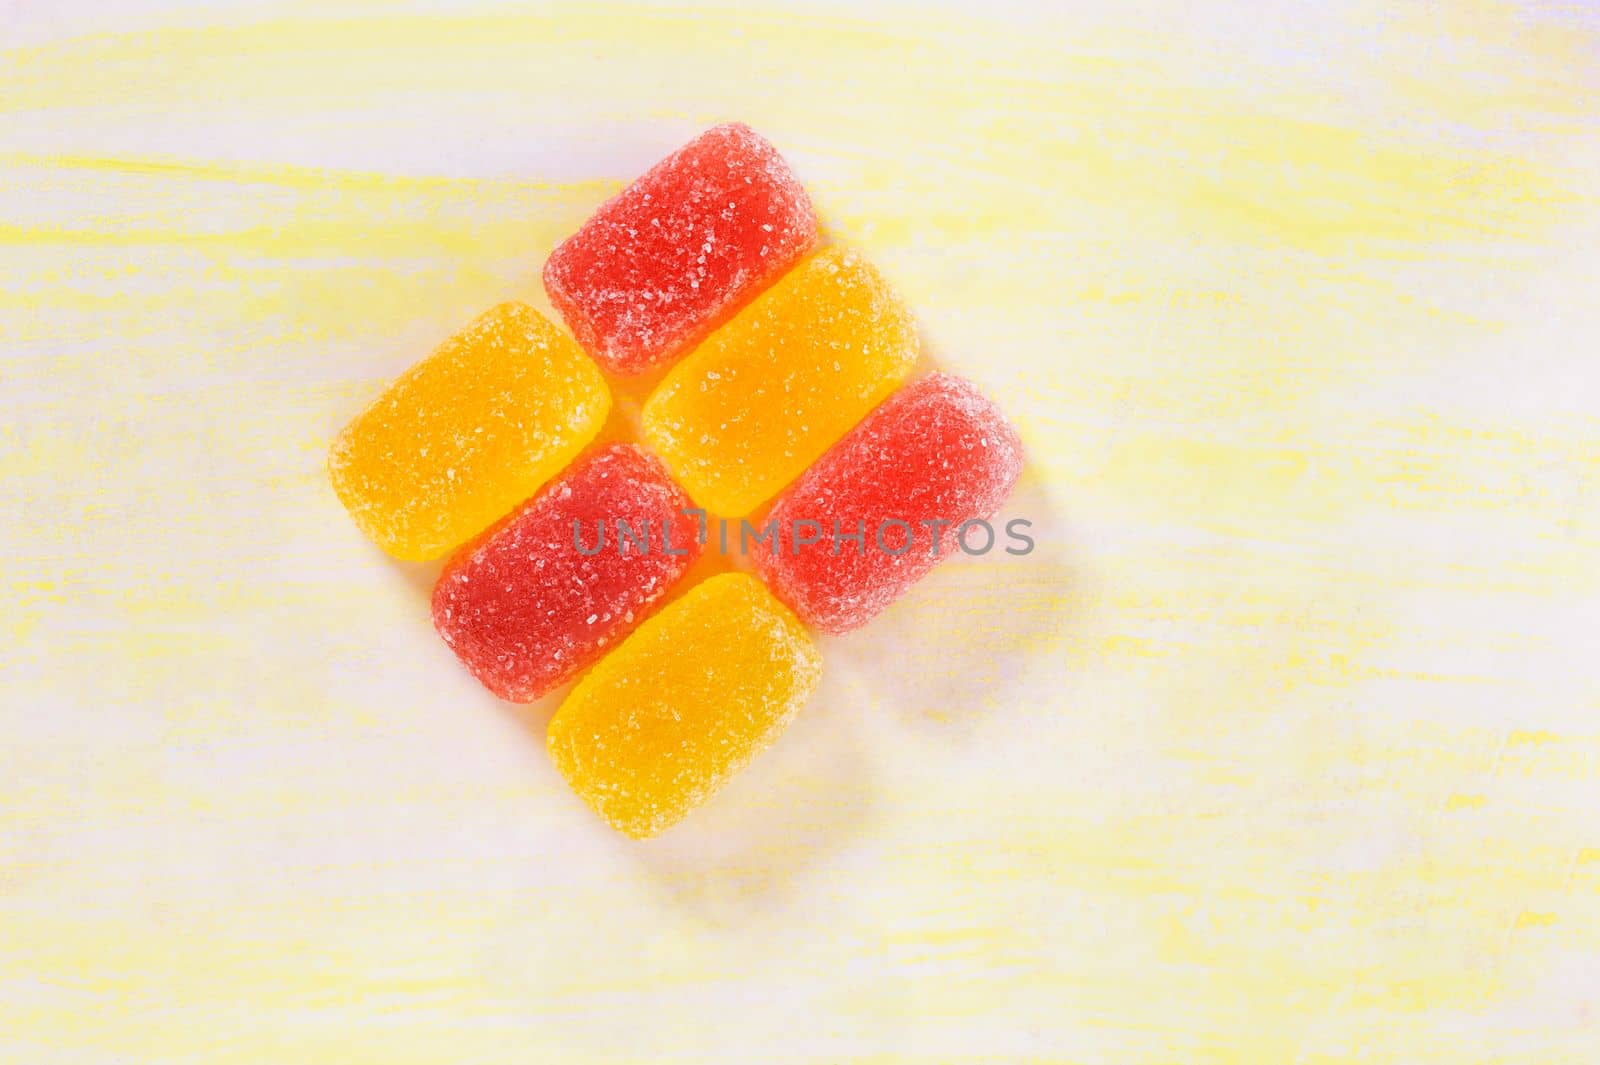 Red and yellow sugar fruit candies ,ready to eat unhealthy sweets